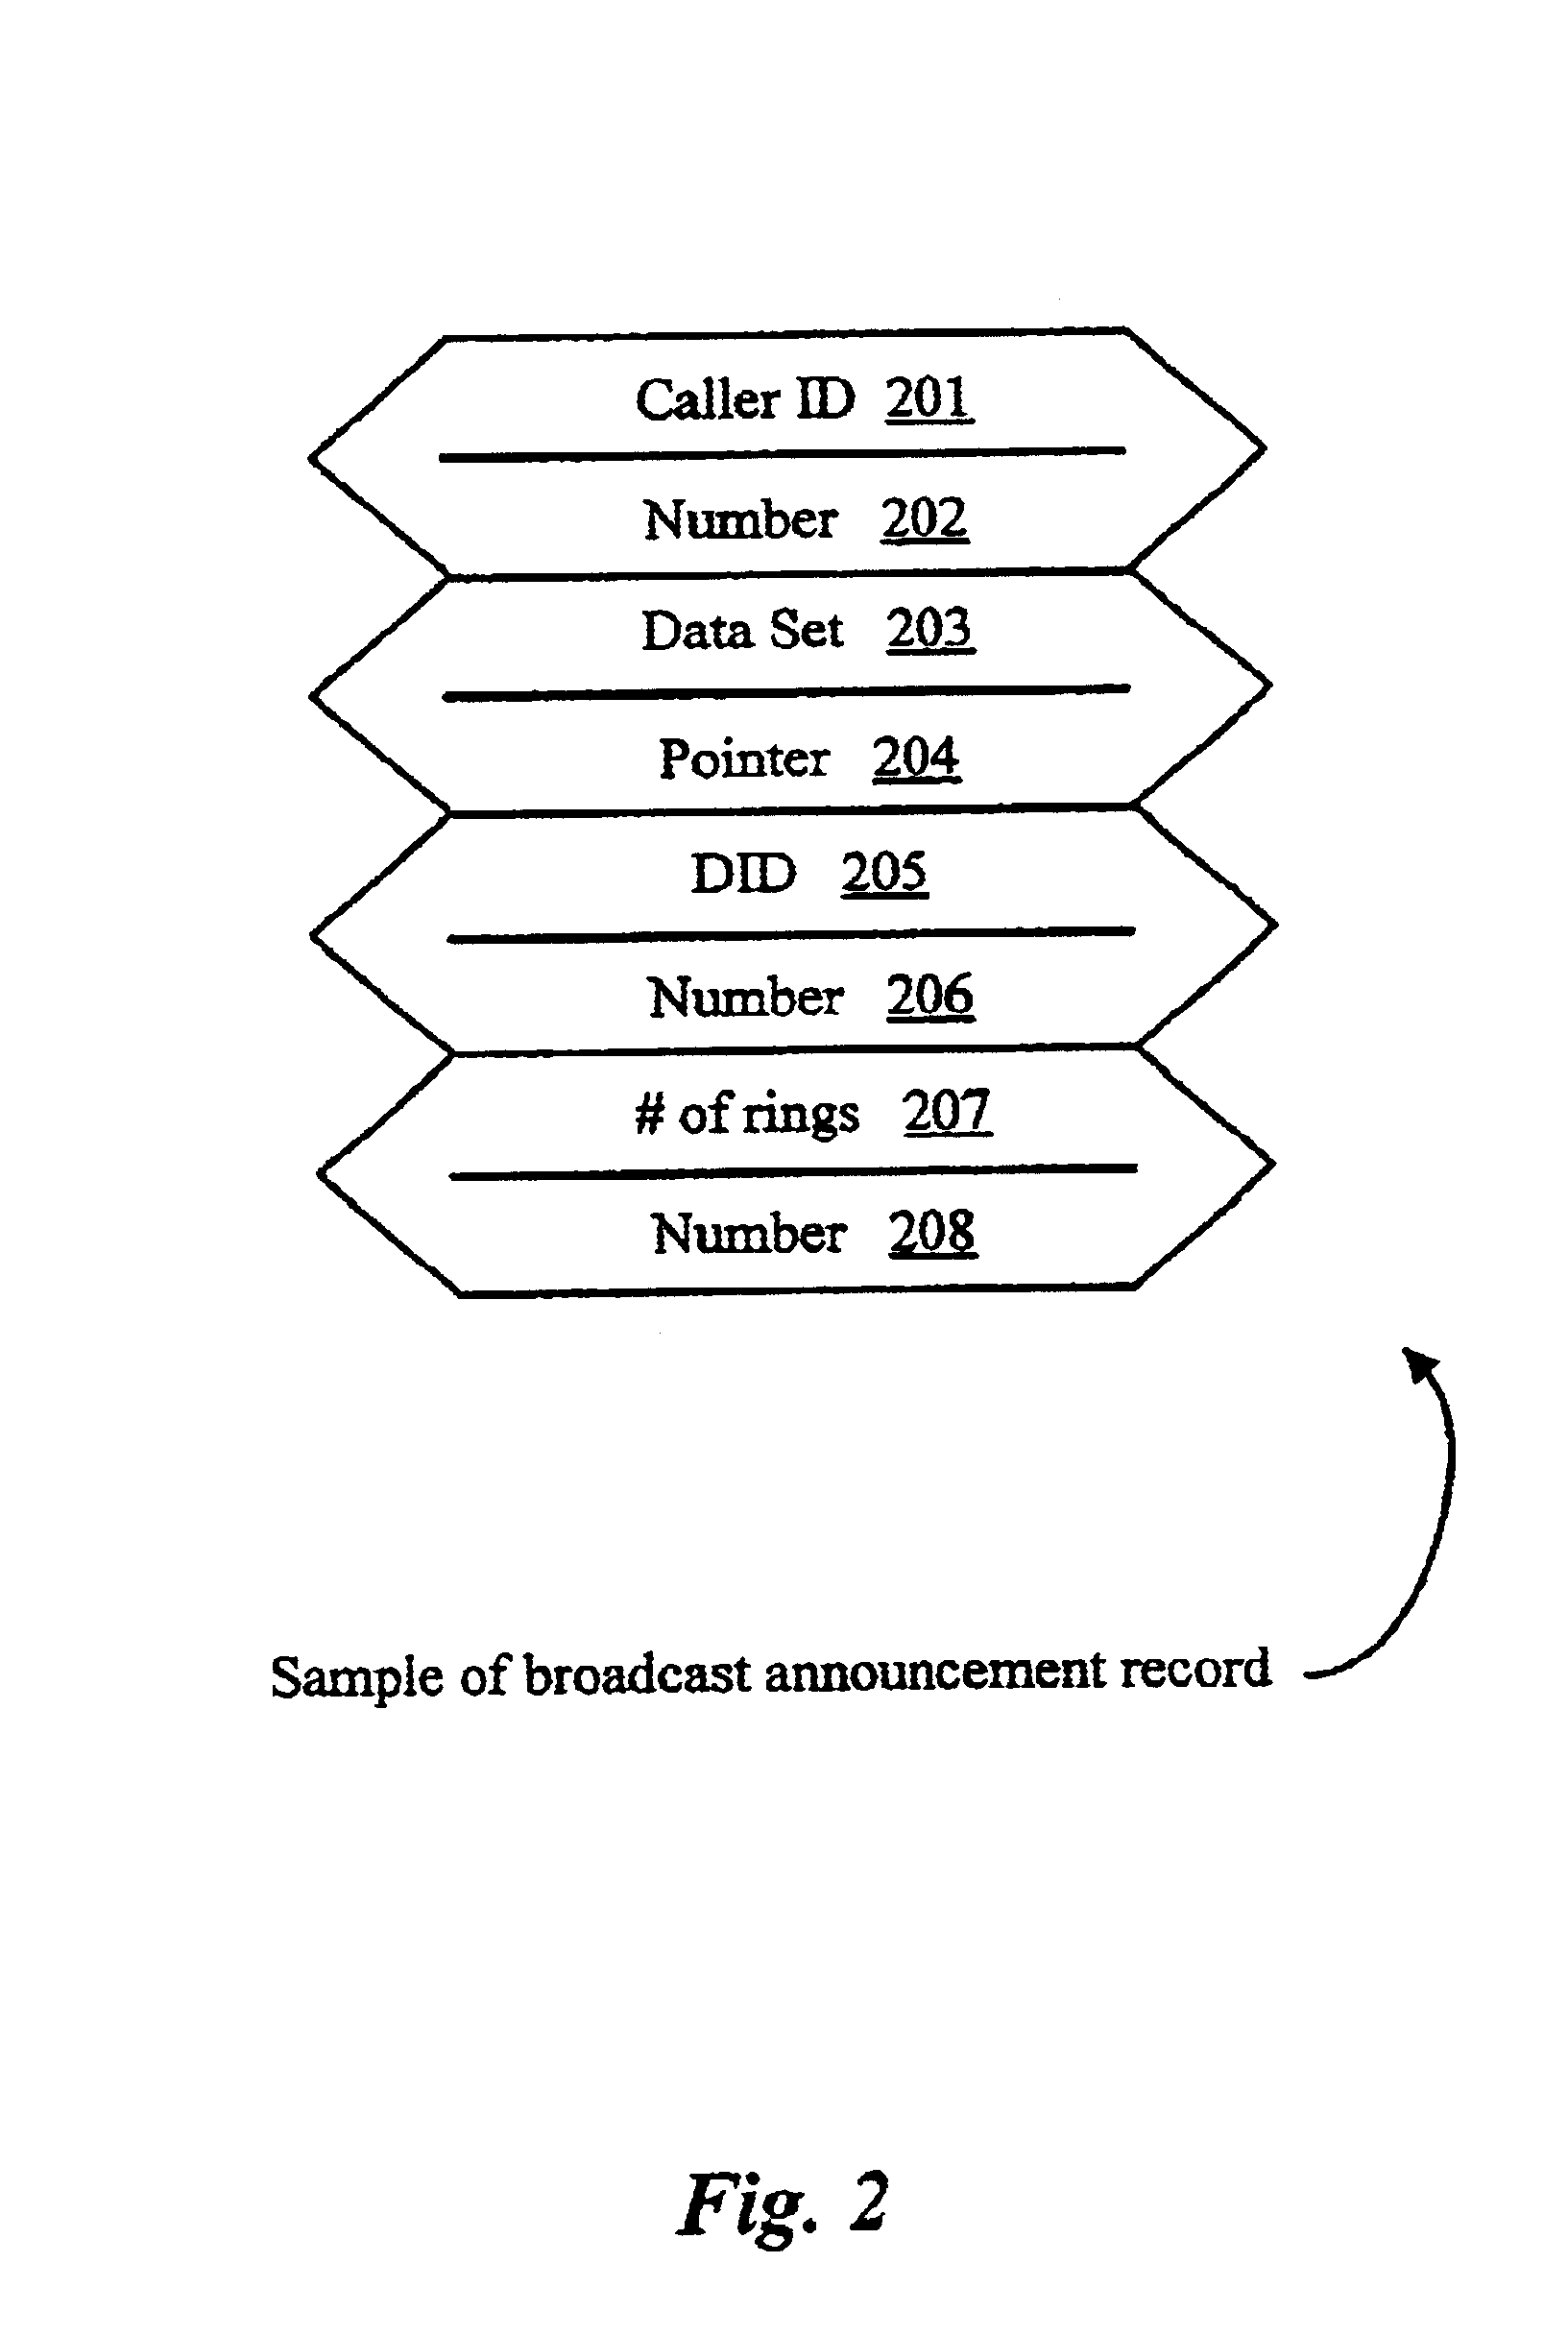 Call and data correspondence in a call-in center employing virtual restructuring for computer telephony integrated functionality